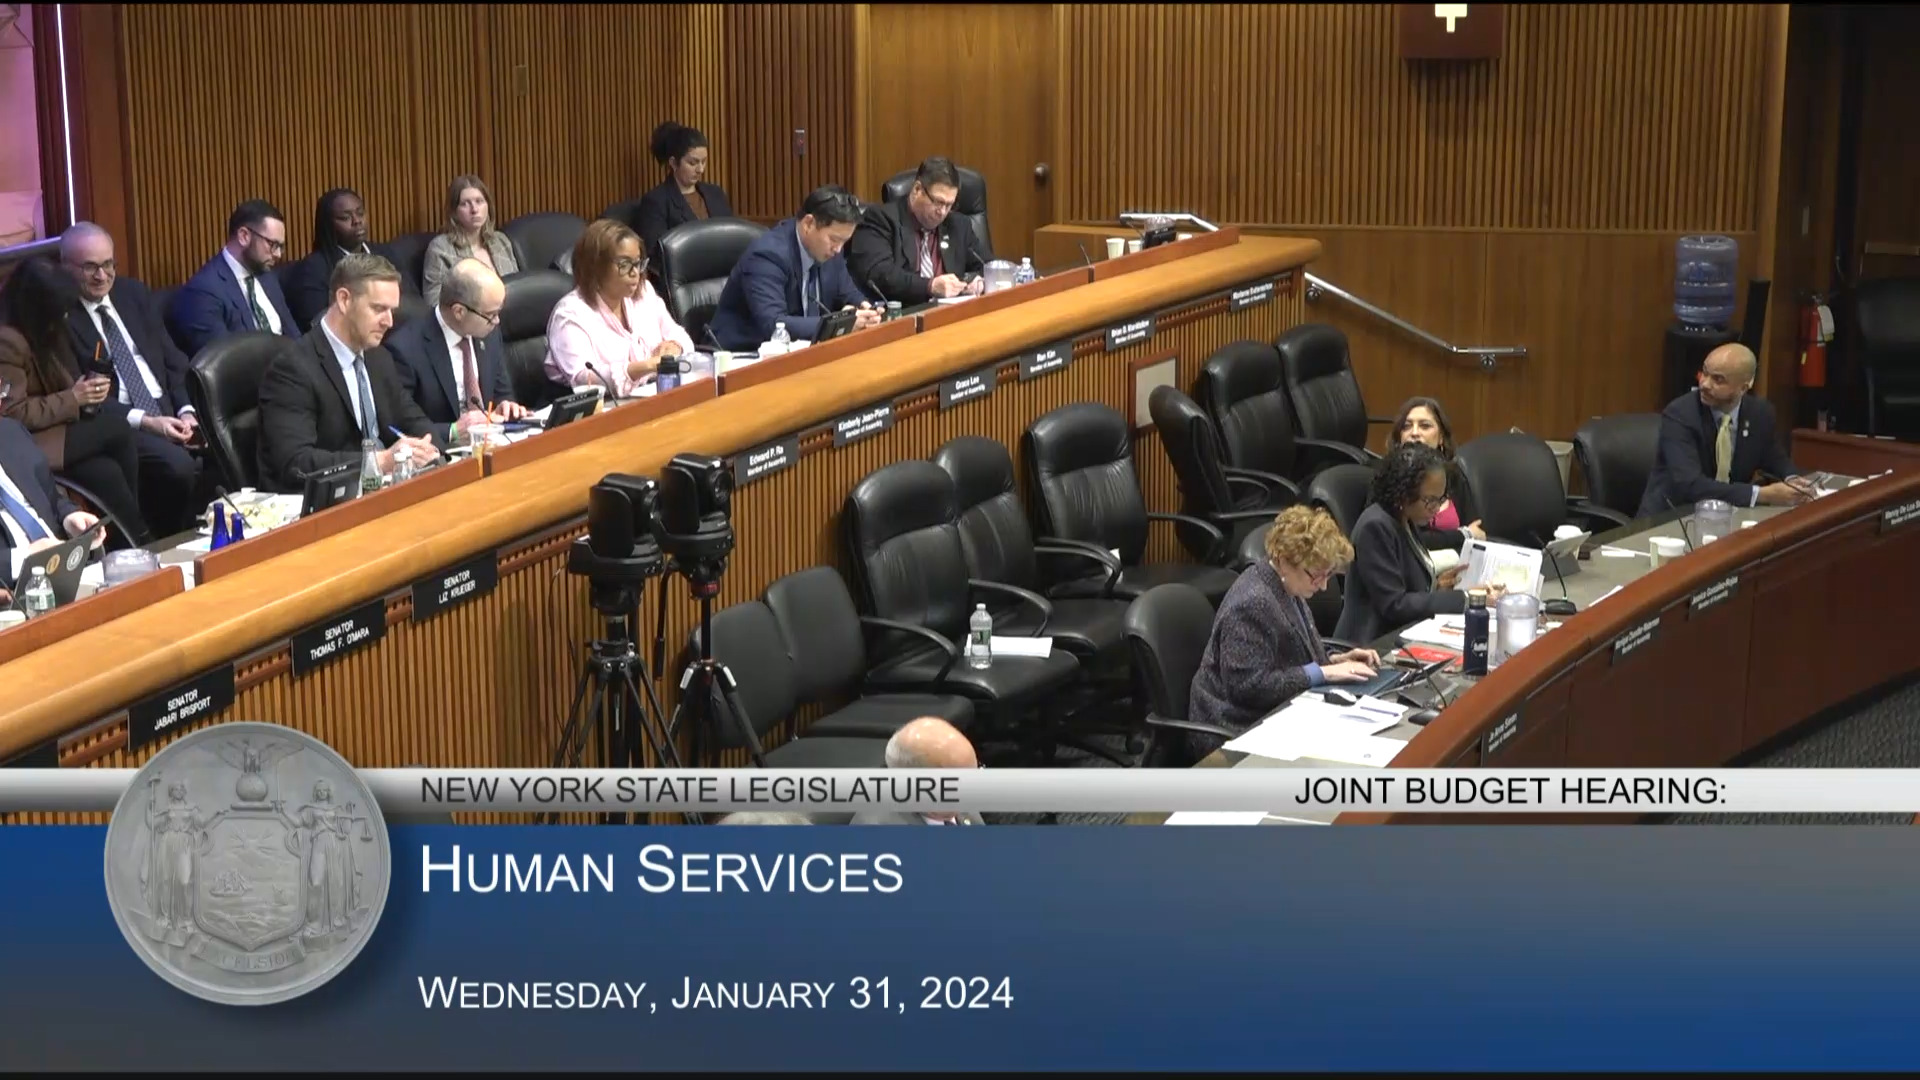 Jean-Pierre Questions Veterans’ Affairs Commissioner During Budget Hearing on Human Services